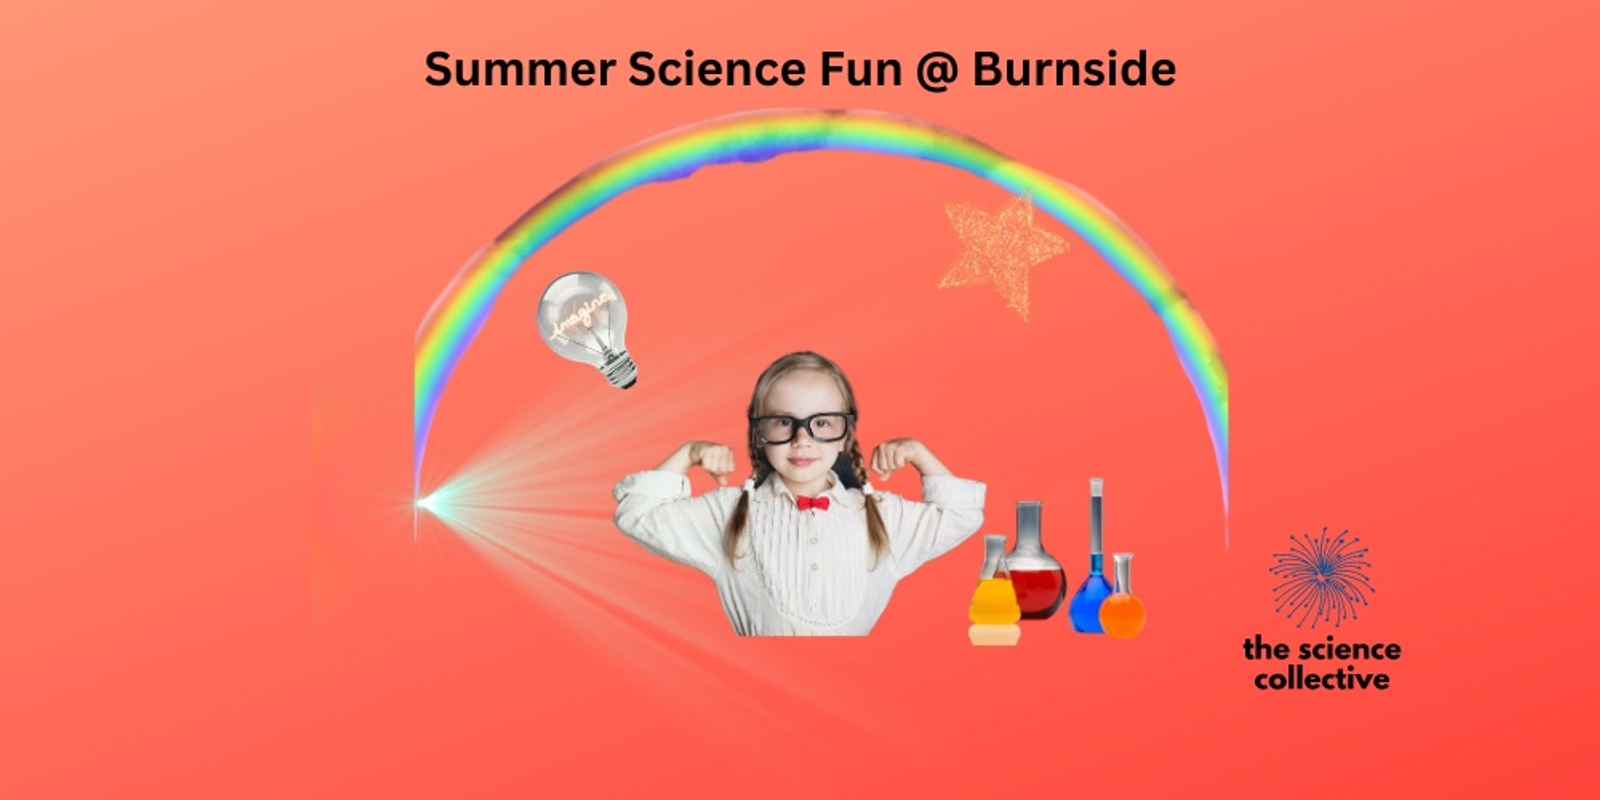 Banner image for Summer Science Afternoon Fun @ Burnside Ballroom 11th January 2023